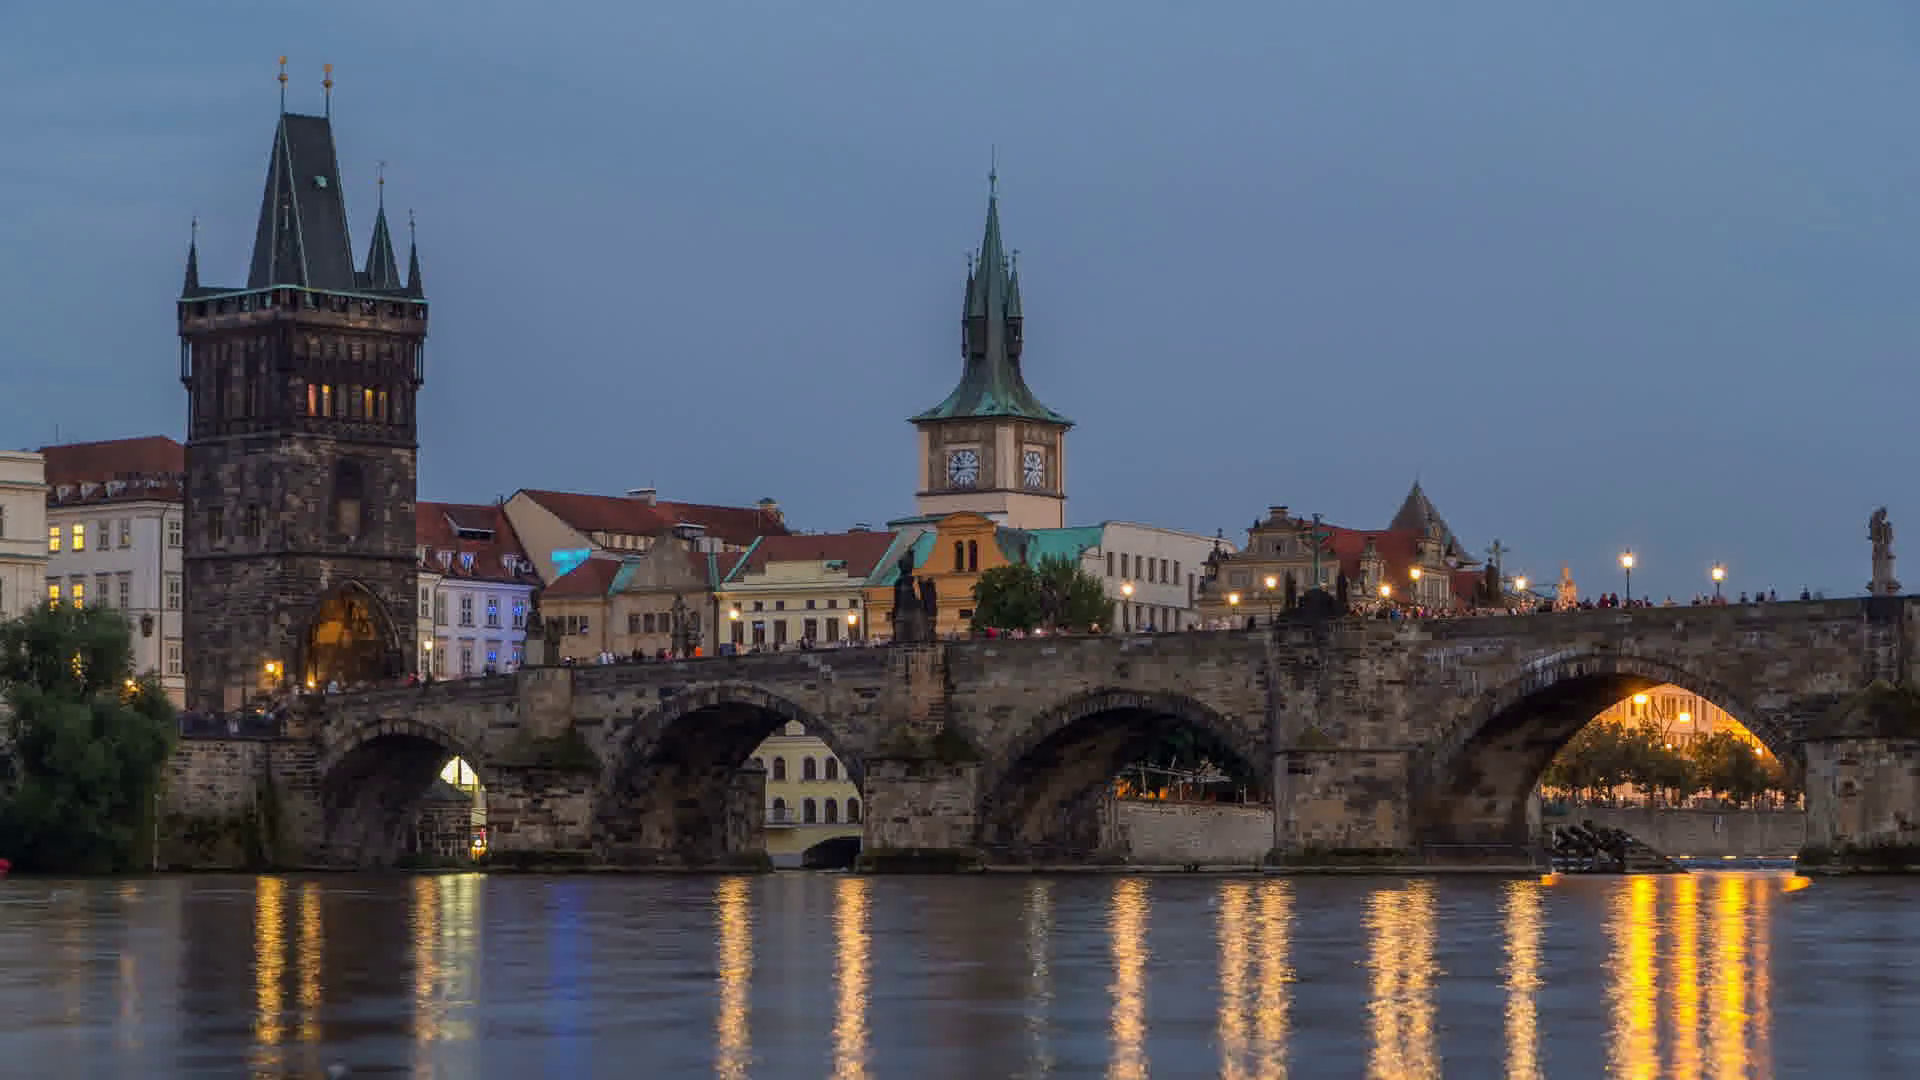 The Charles Bridge day to night transition timelapse over the Vltava ...